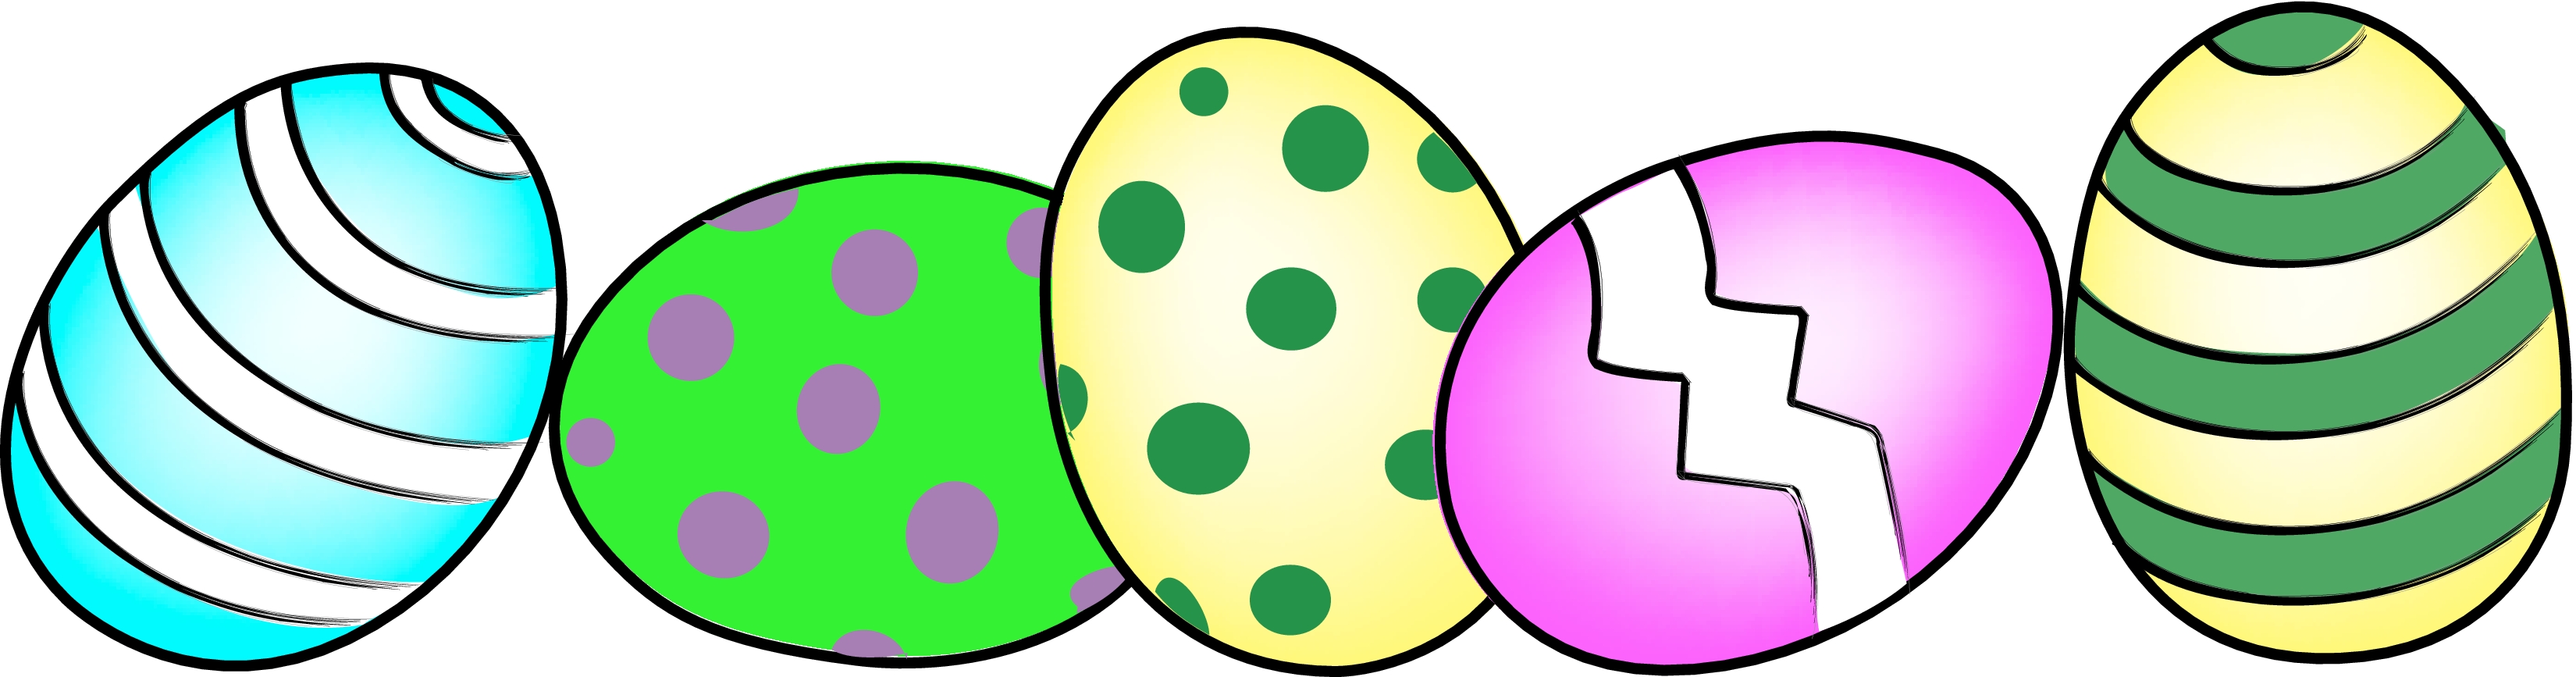 easter clip art dividers - photo #41